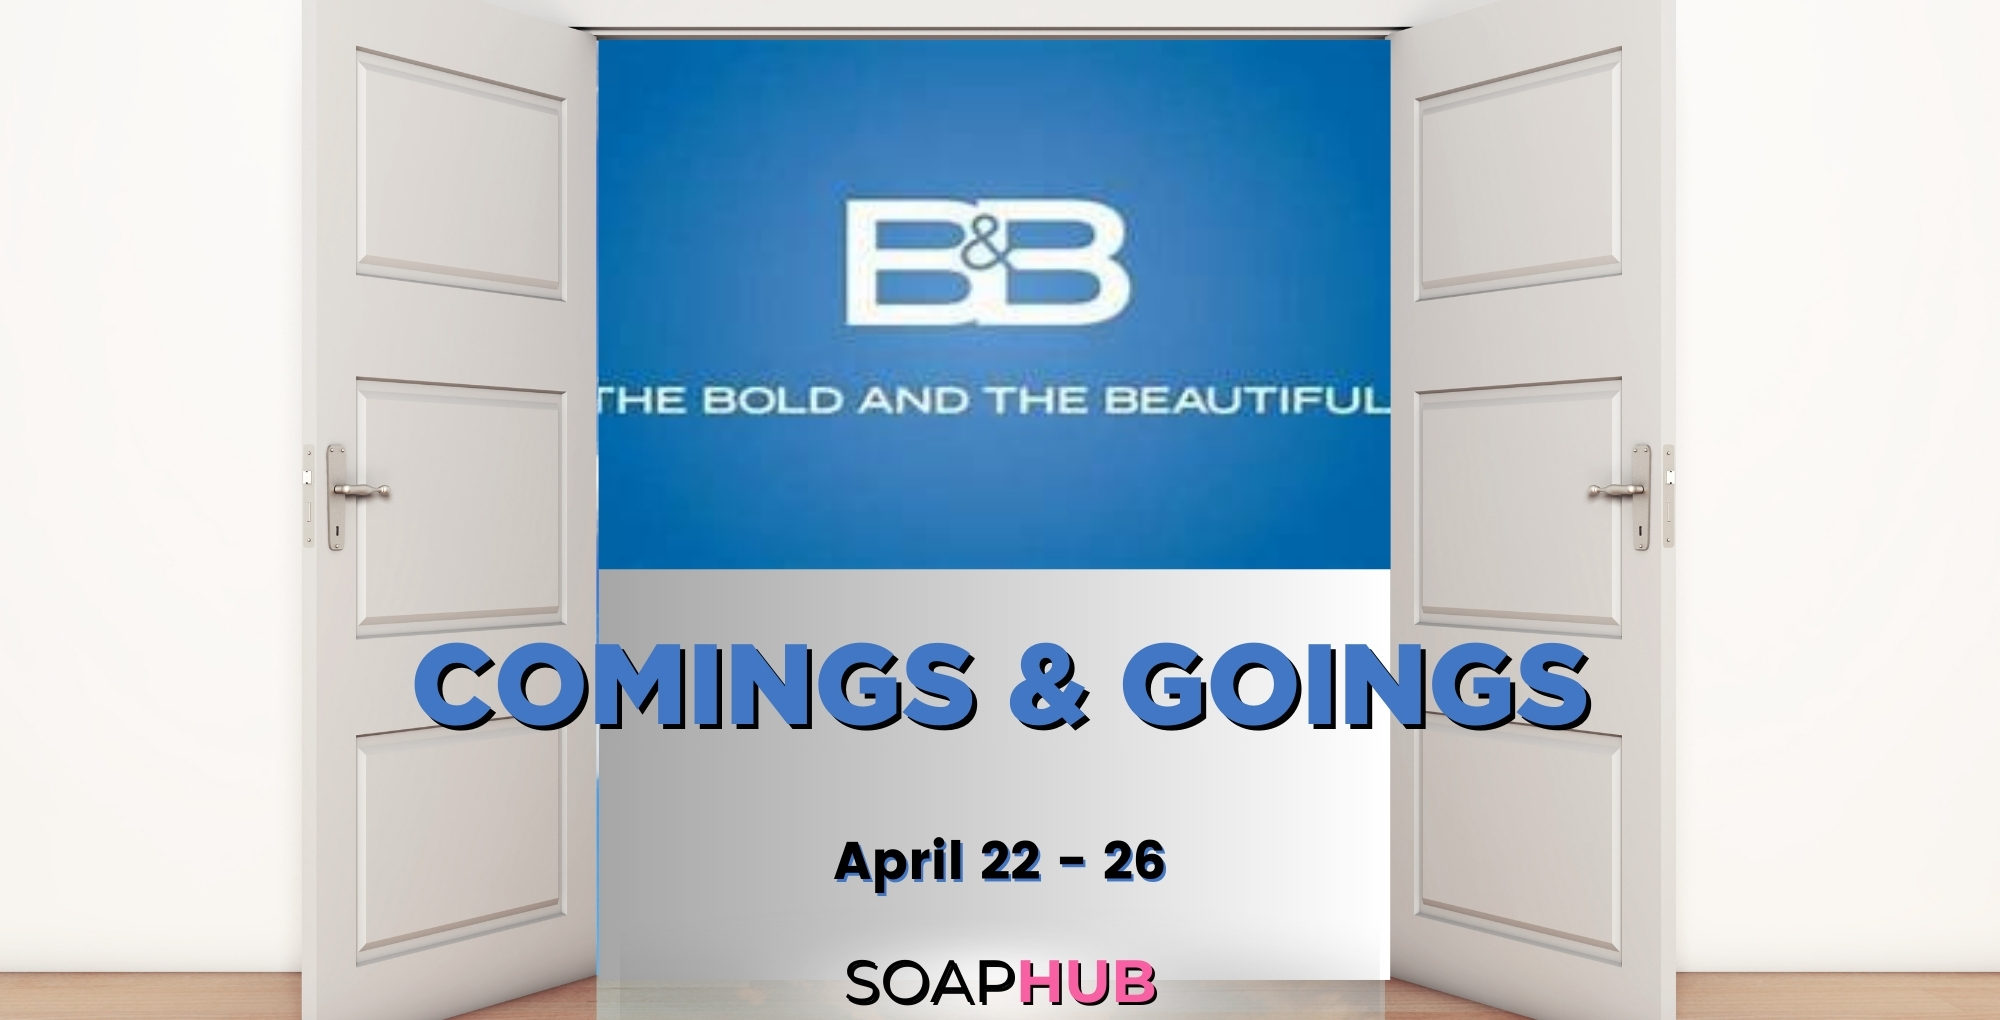 The Bold and the Beautiful comings and goings for April 22-26 and the Soap Hub logo.